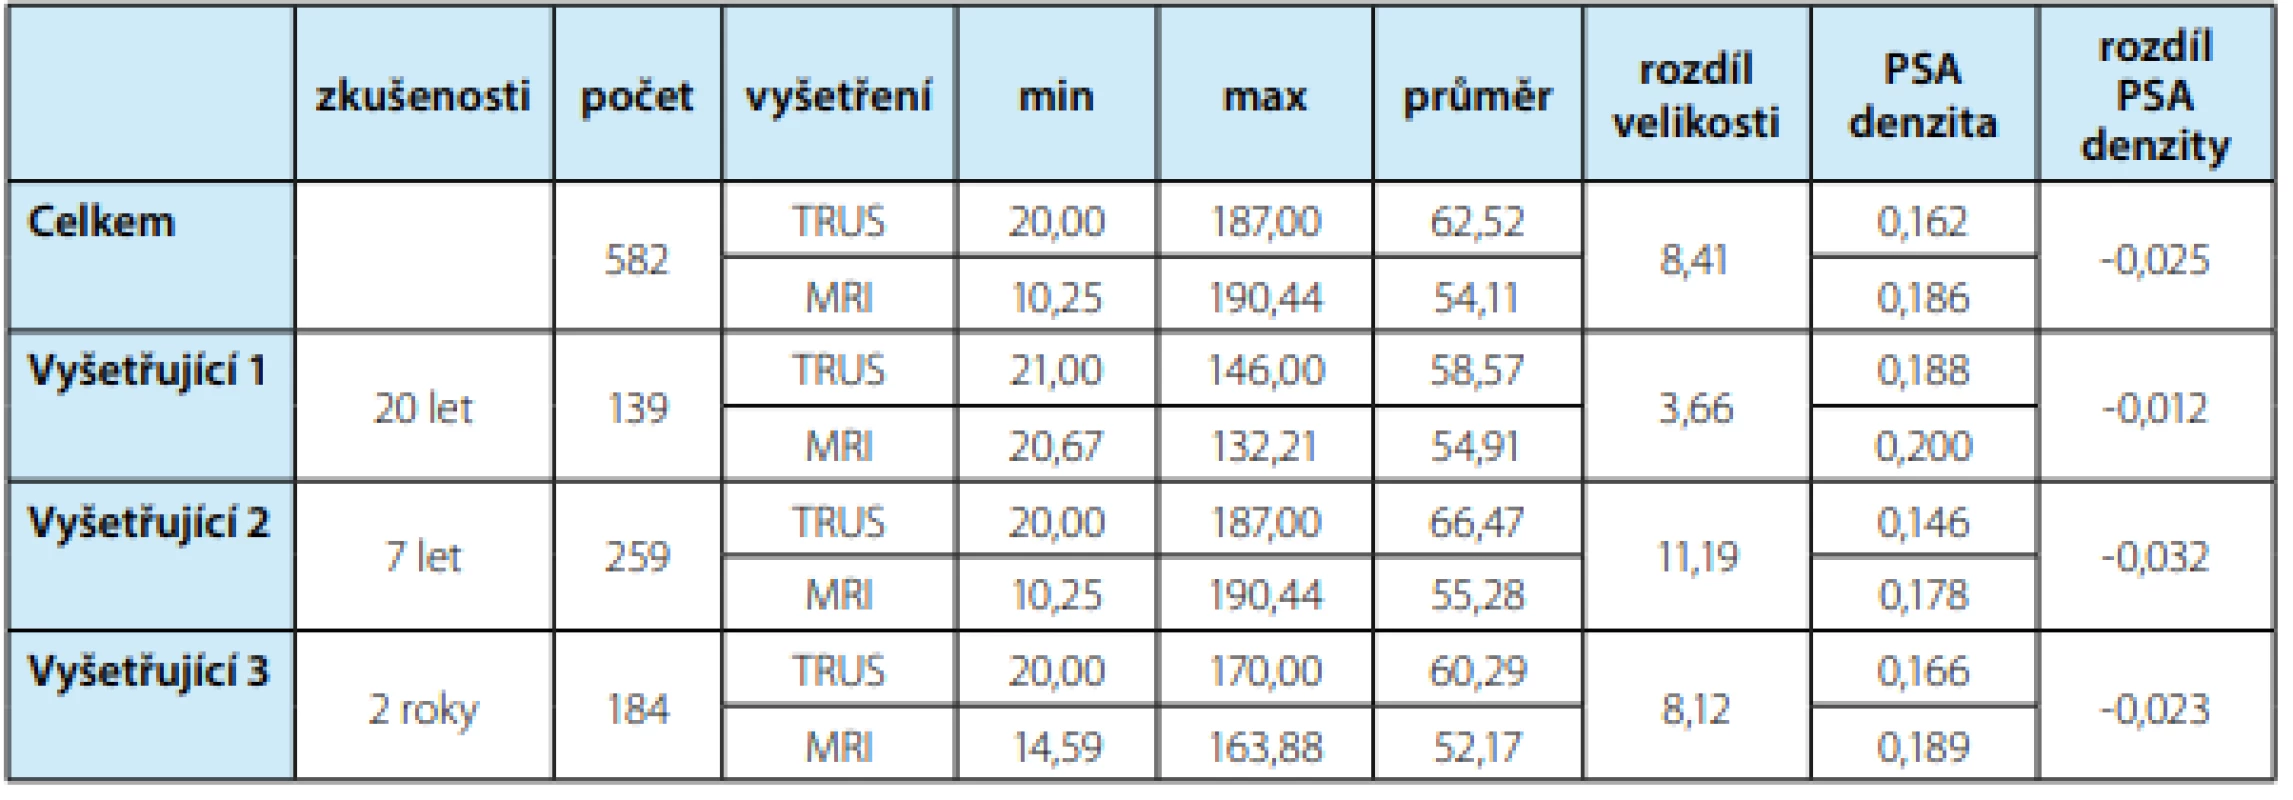 Výsledky pro celý soubor i podskupiny<br>
Tab. 1. Results for all patients and subgroups